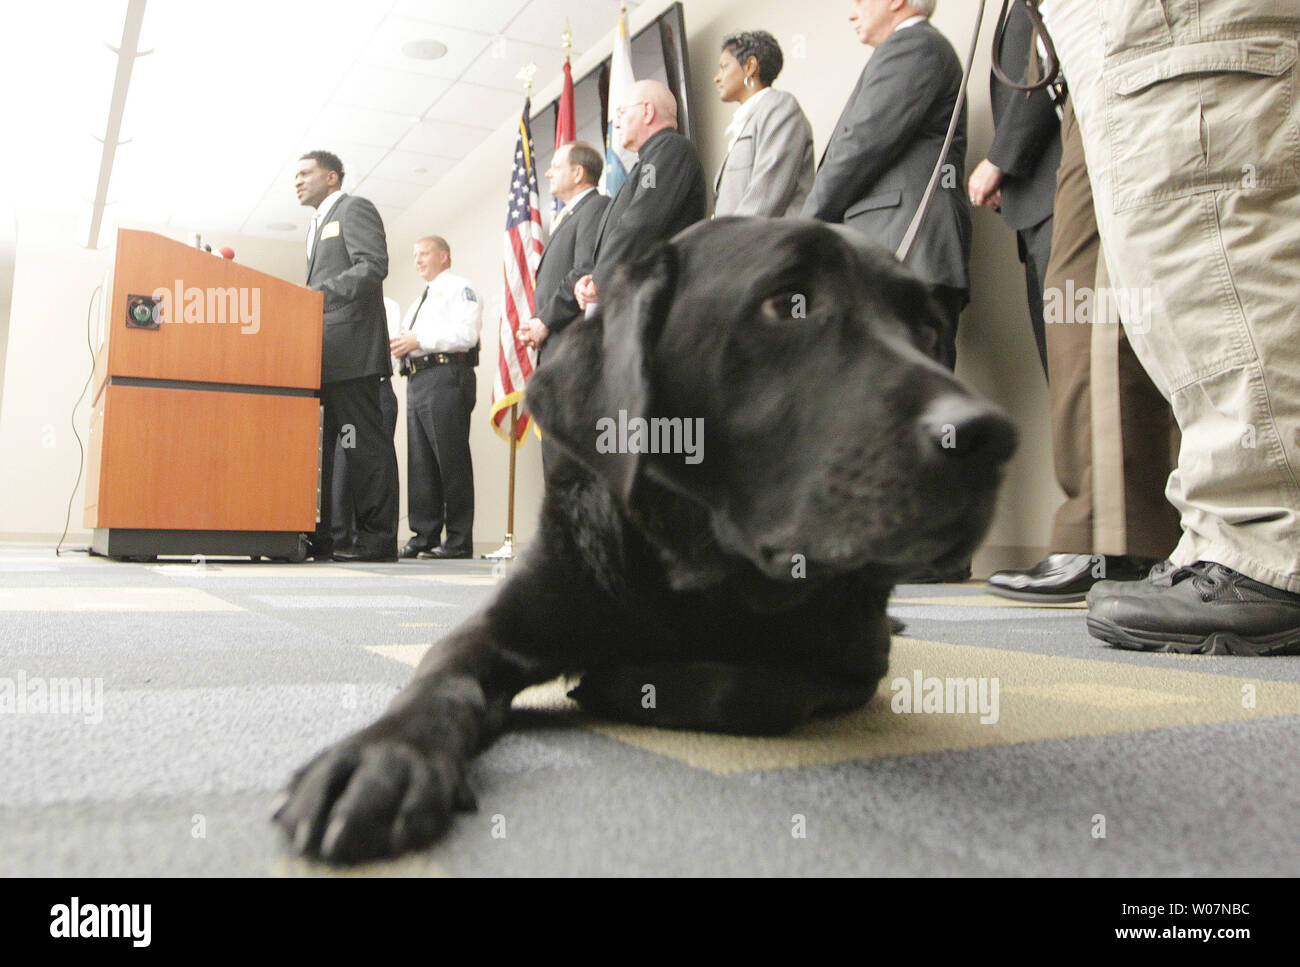 Chloe, the St. Louis County police dog, lays on the floor as Pastor W. D. Billups of the New Life Missionary Baptist Church talks about the arrest of a suspect who set fire to his church on October 17, 2015, during a press confernce in St. Louis on October 30, 2015. St. Louis Police say thay have arrested David Lopez Jackson for setting two of the seven suspious fires at St. Louis are churches. Based on the investigation so far, police say there is no indication of a hate crime or sign of any particular Christian denomination or ethnic group being targeted. Chloe helped in the investigation. P Stock Photo